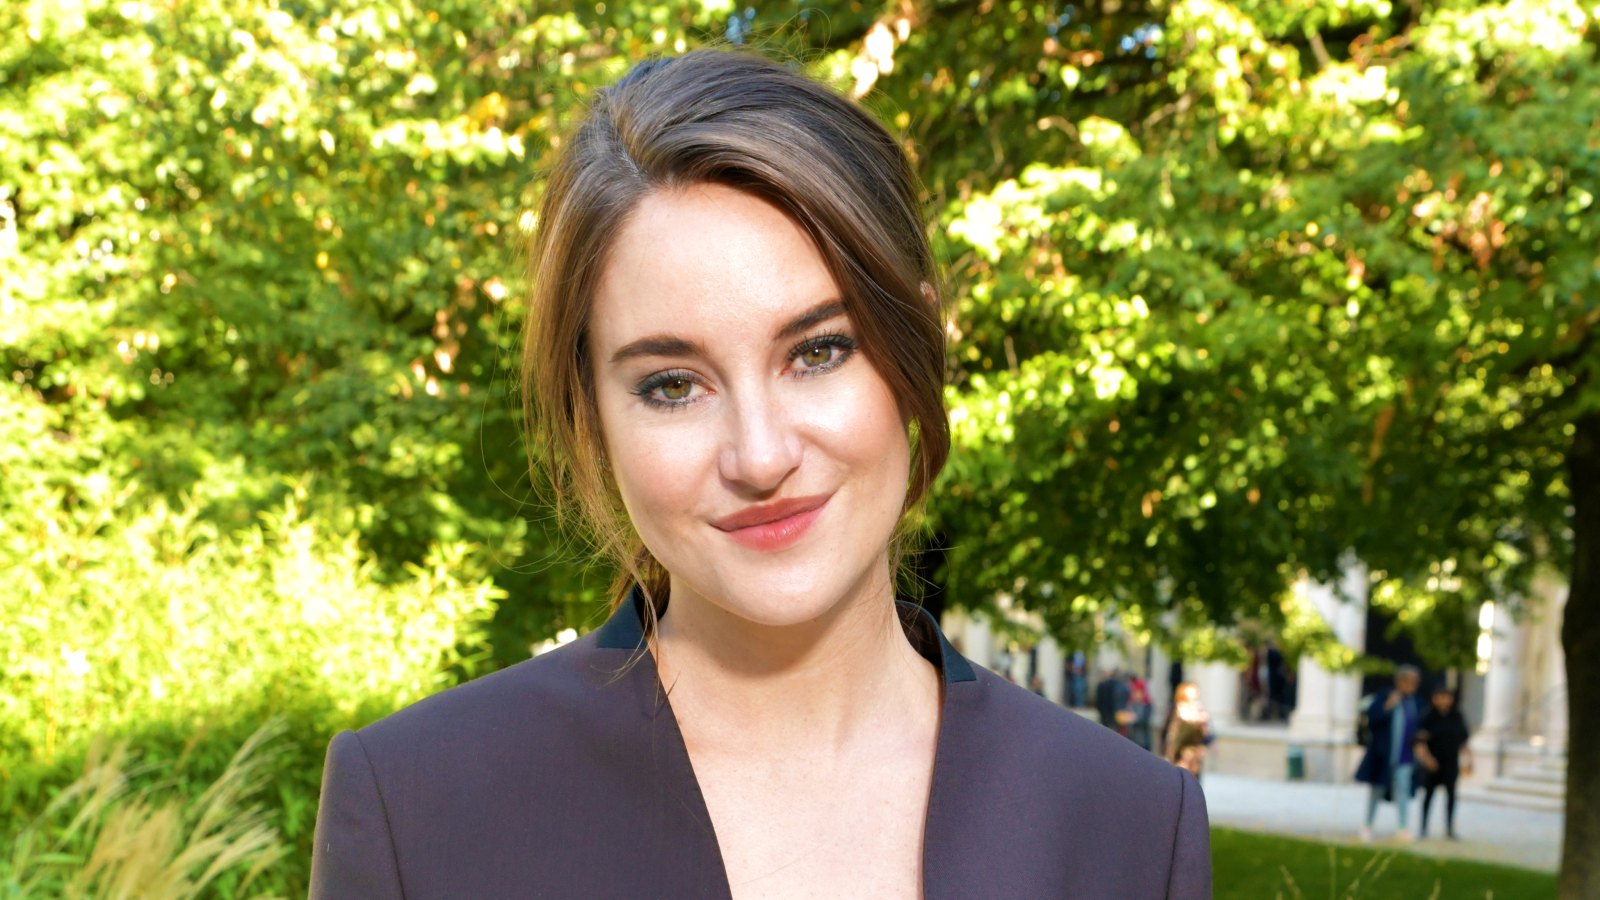 Shailene Woodley Says ‘Scary Physical Situation’ Made Her Take a Step Back From Career